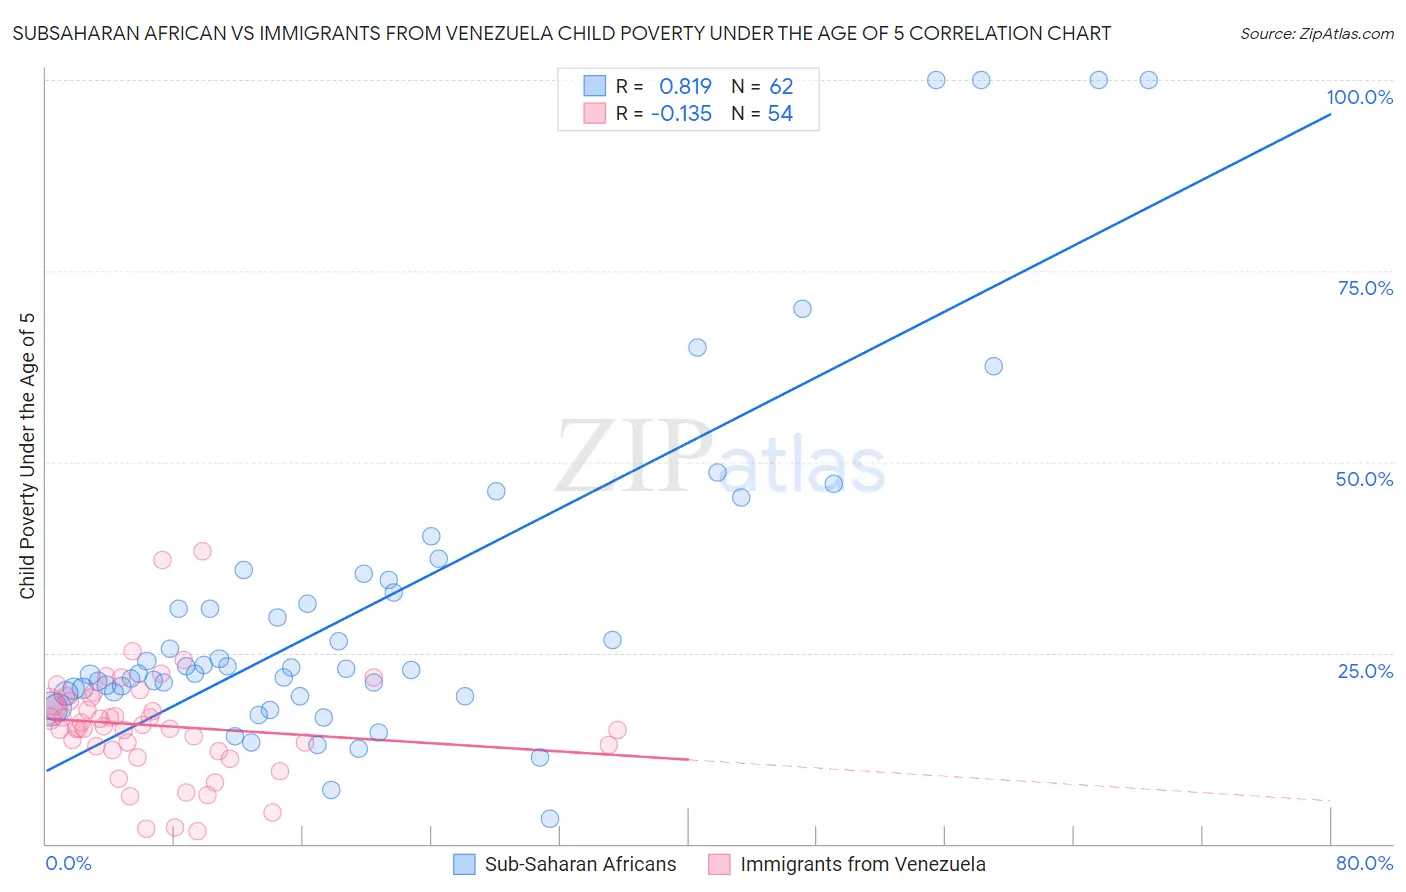 Subsaharan African vs Immigrants from Venezuela Child Poverty Under the Age of 5